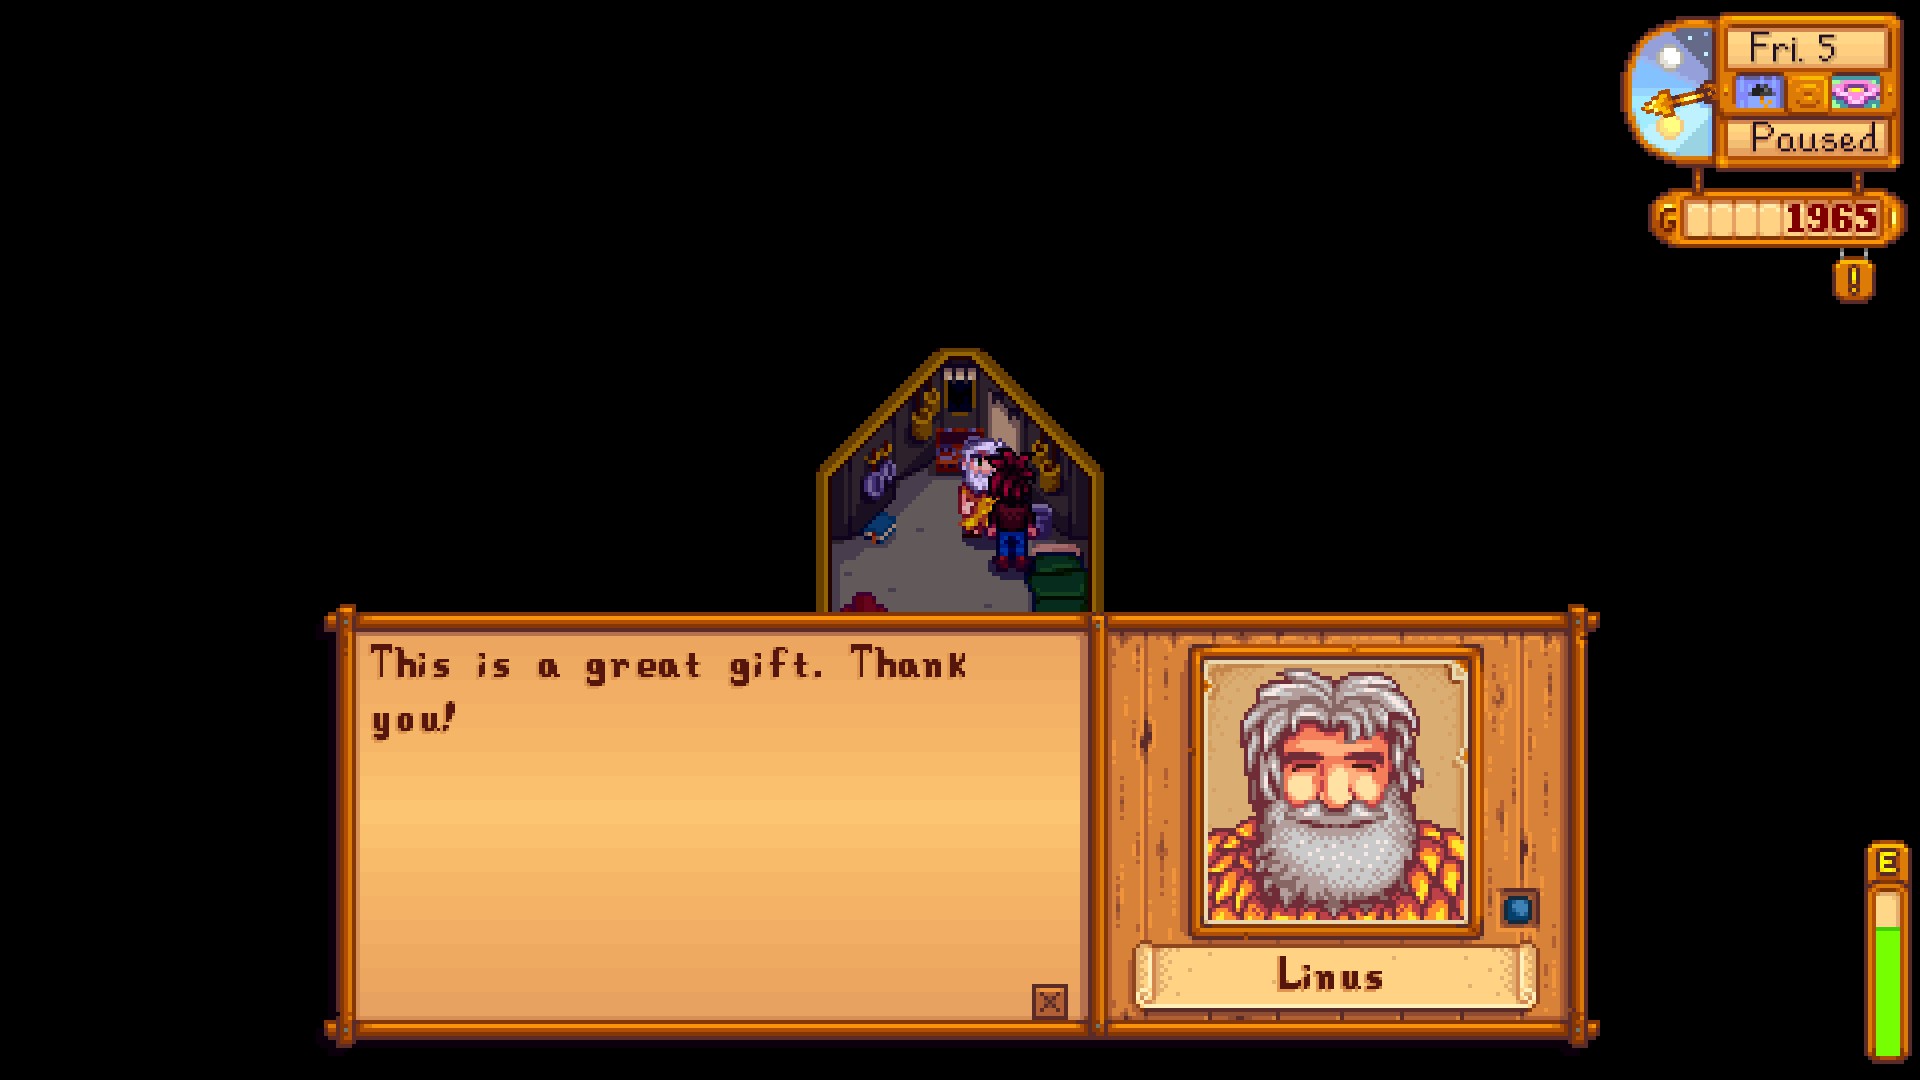 This is the first time someone’s ever liked a gift. 